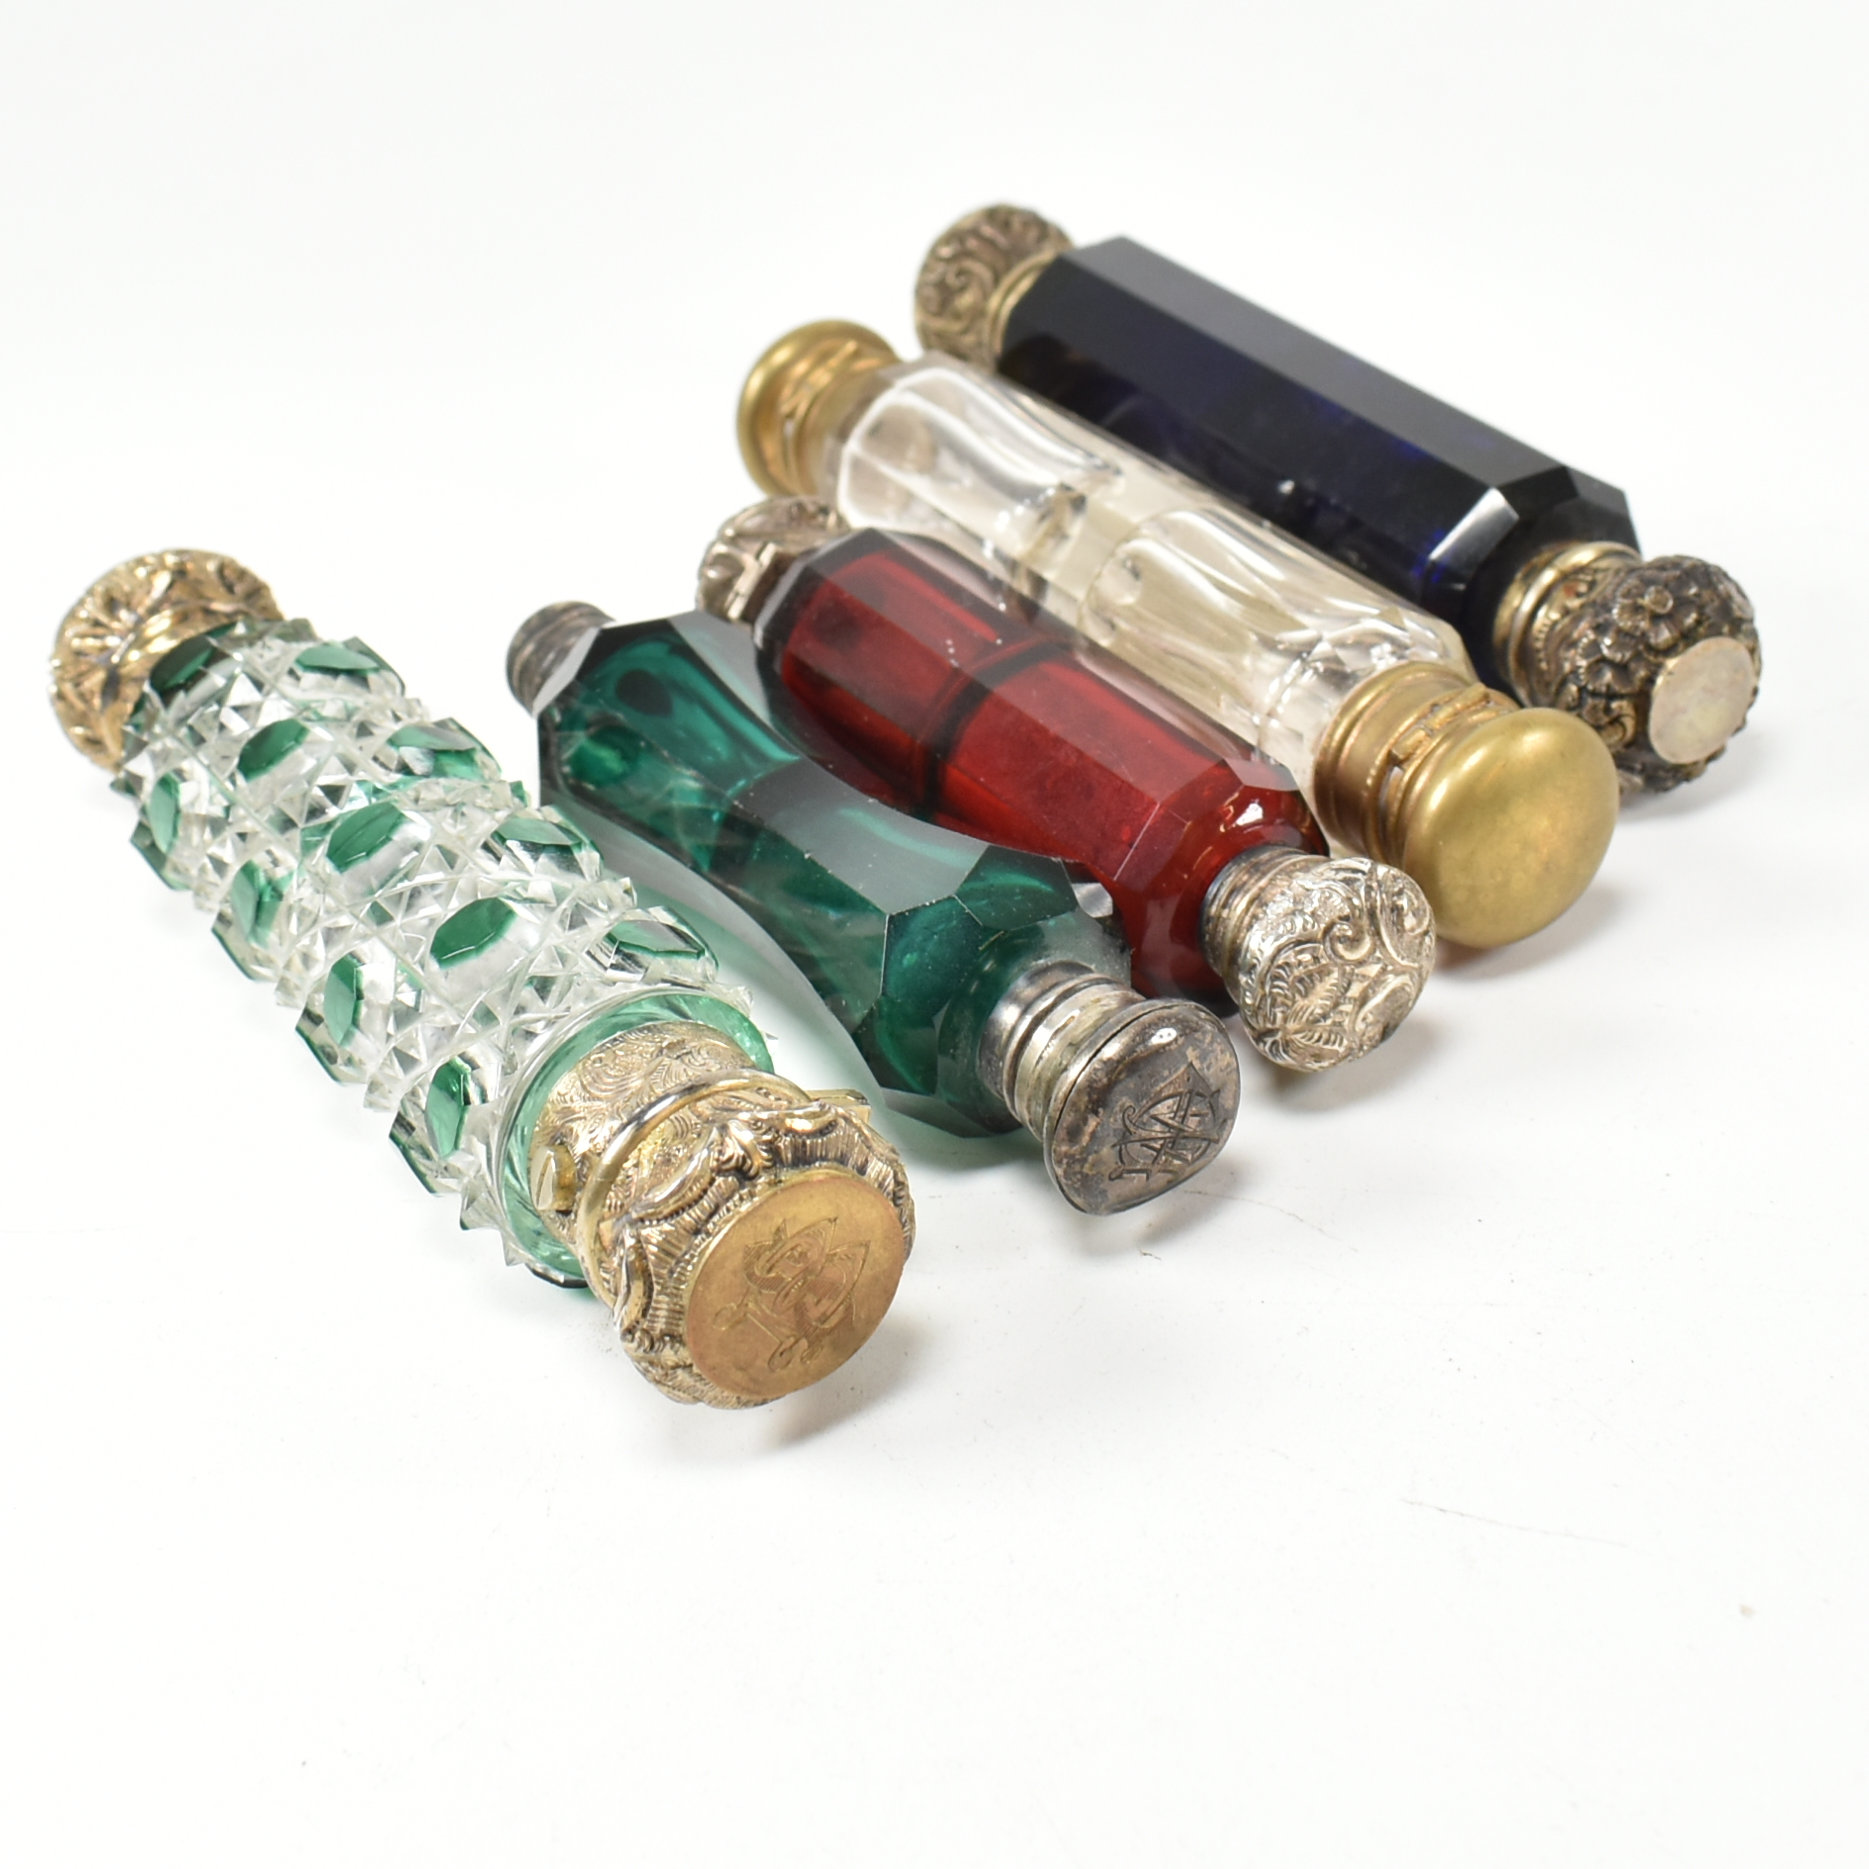 ANTIQUE DOUBLE ENDED GLASS SCENT BOTTLES - Image 6 of 7